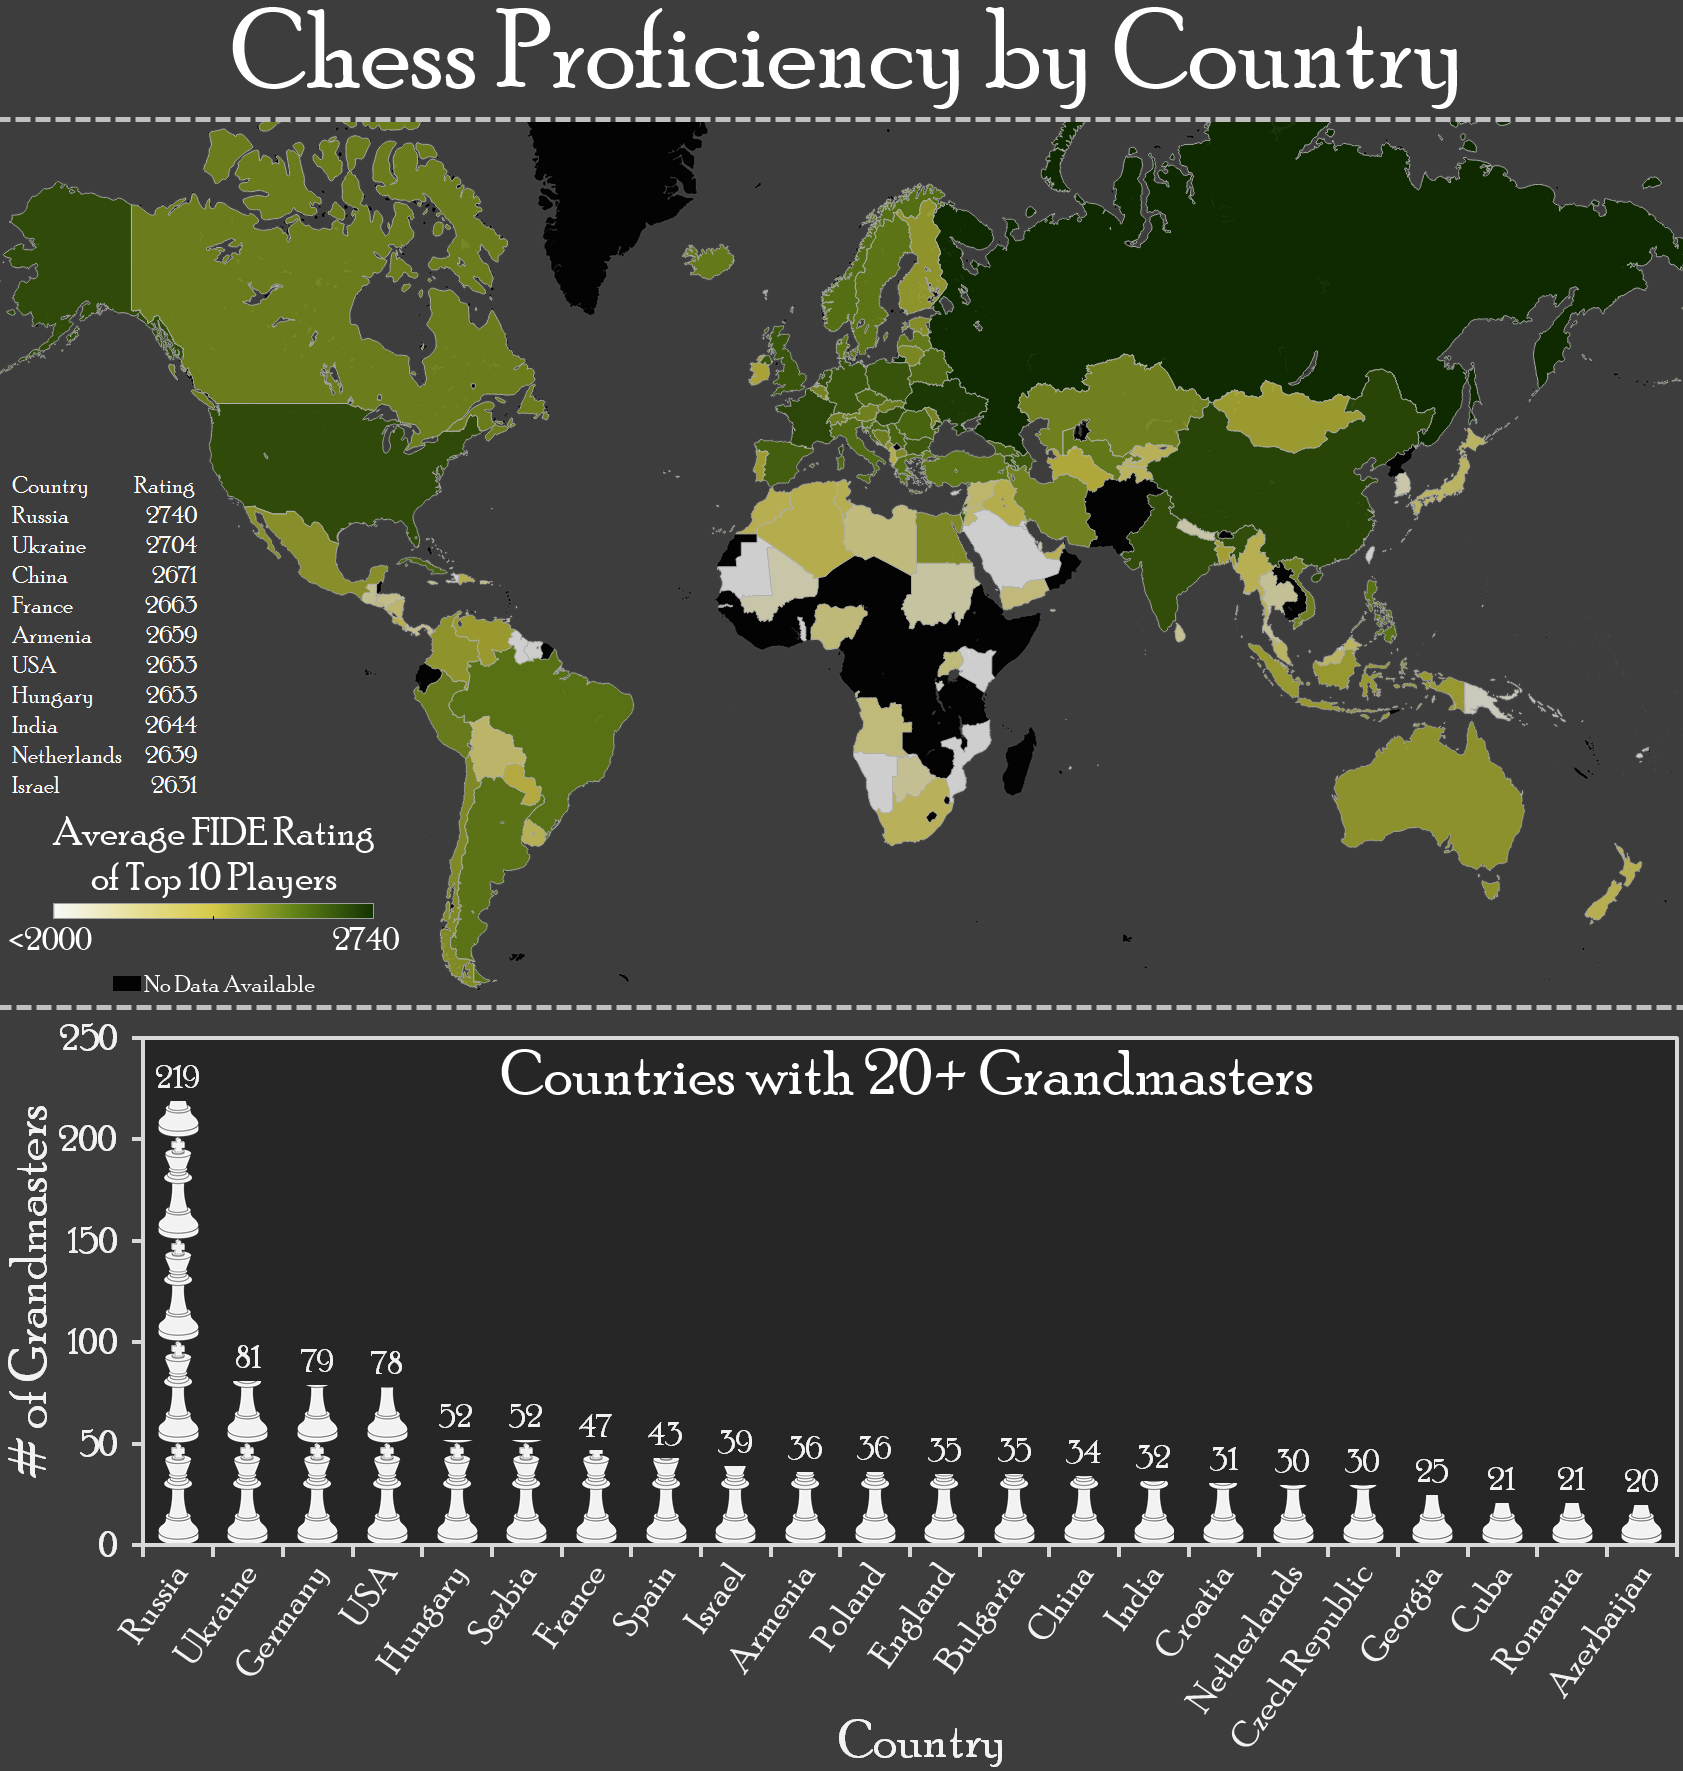 I made a World Map of FIDE Top 100 in the last 3 decades to show  growth/decline of chess in various countries over the years : r/chess